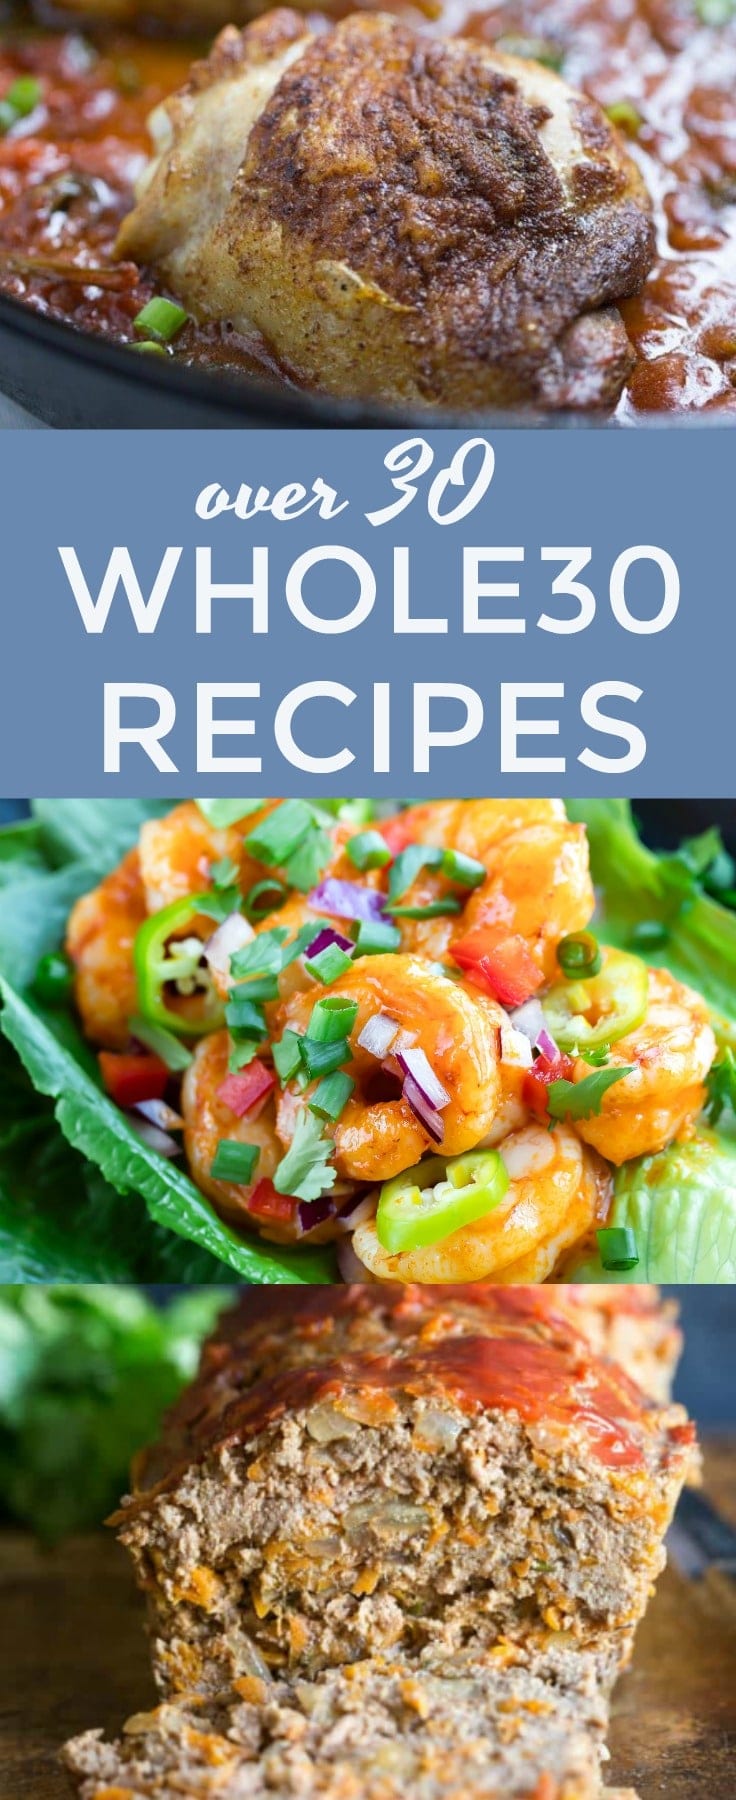 Over 30 Whole30 Recipes that Everyone Will Love! #whole30 #changeyourlife #paleo #healthyrecipes #cleaneats #realfood